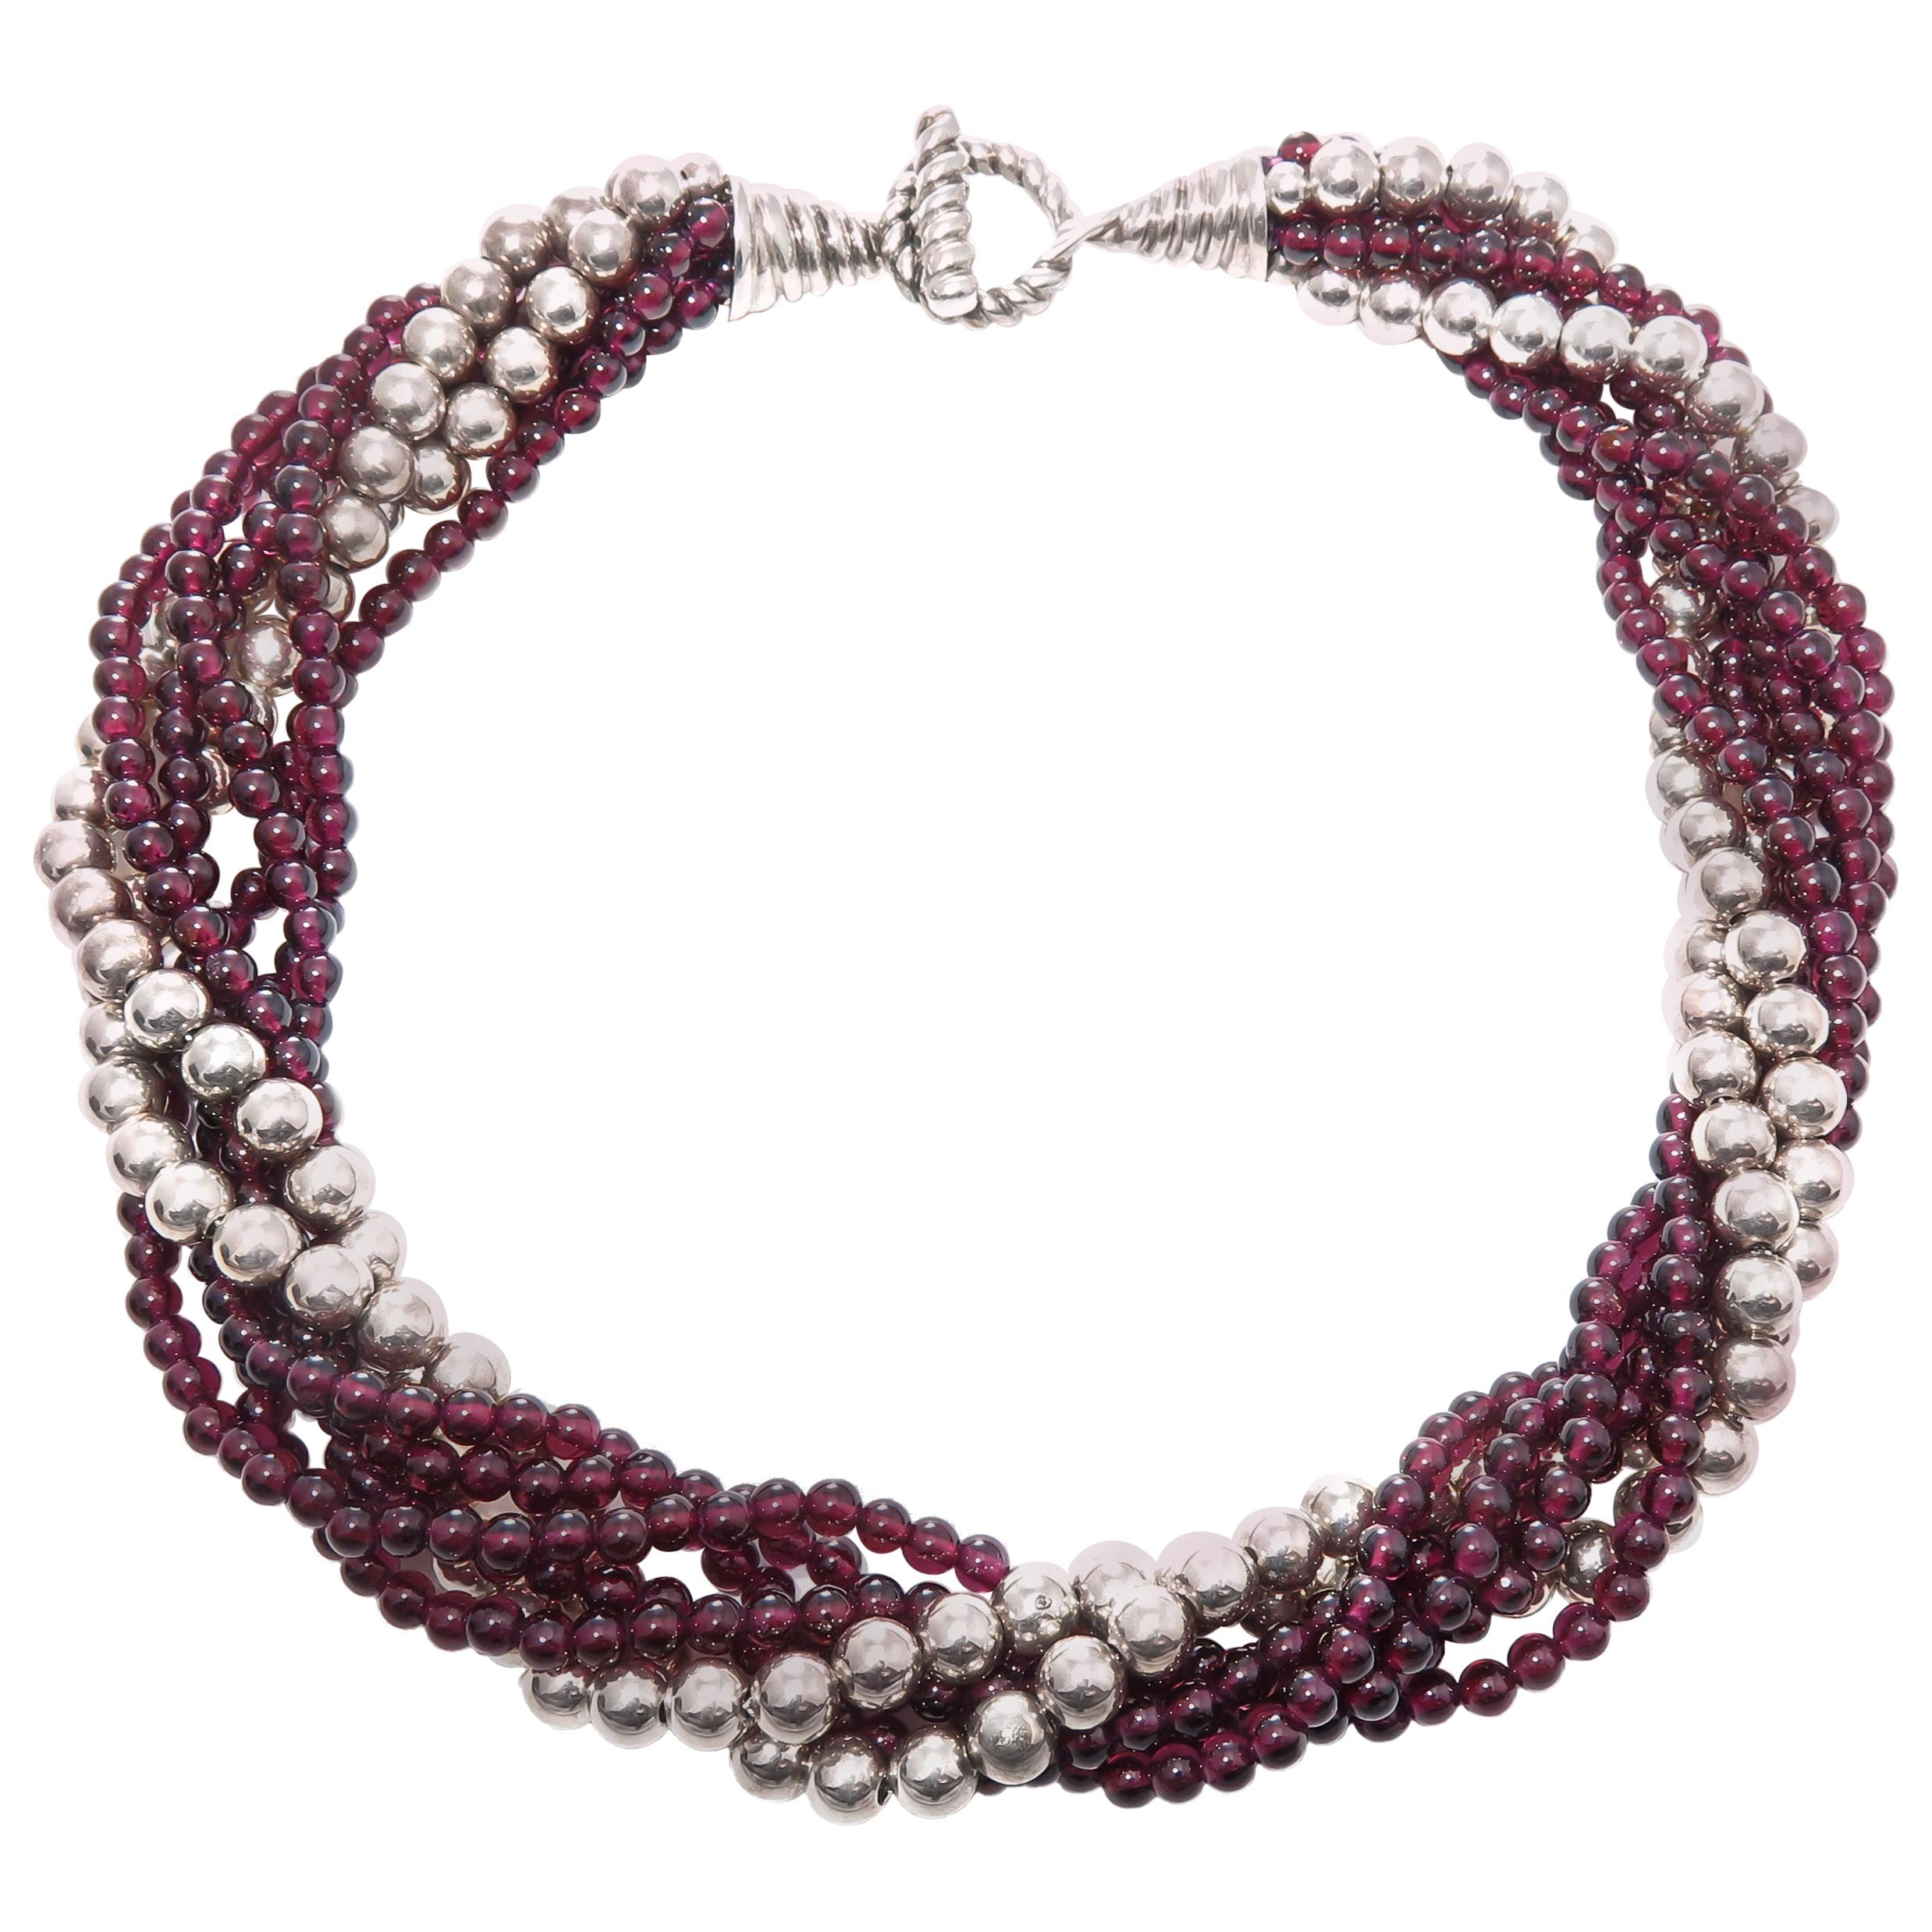 Tiffany & Co. Garnet and Sterling Silver Bead Torsade Necklace